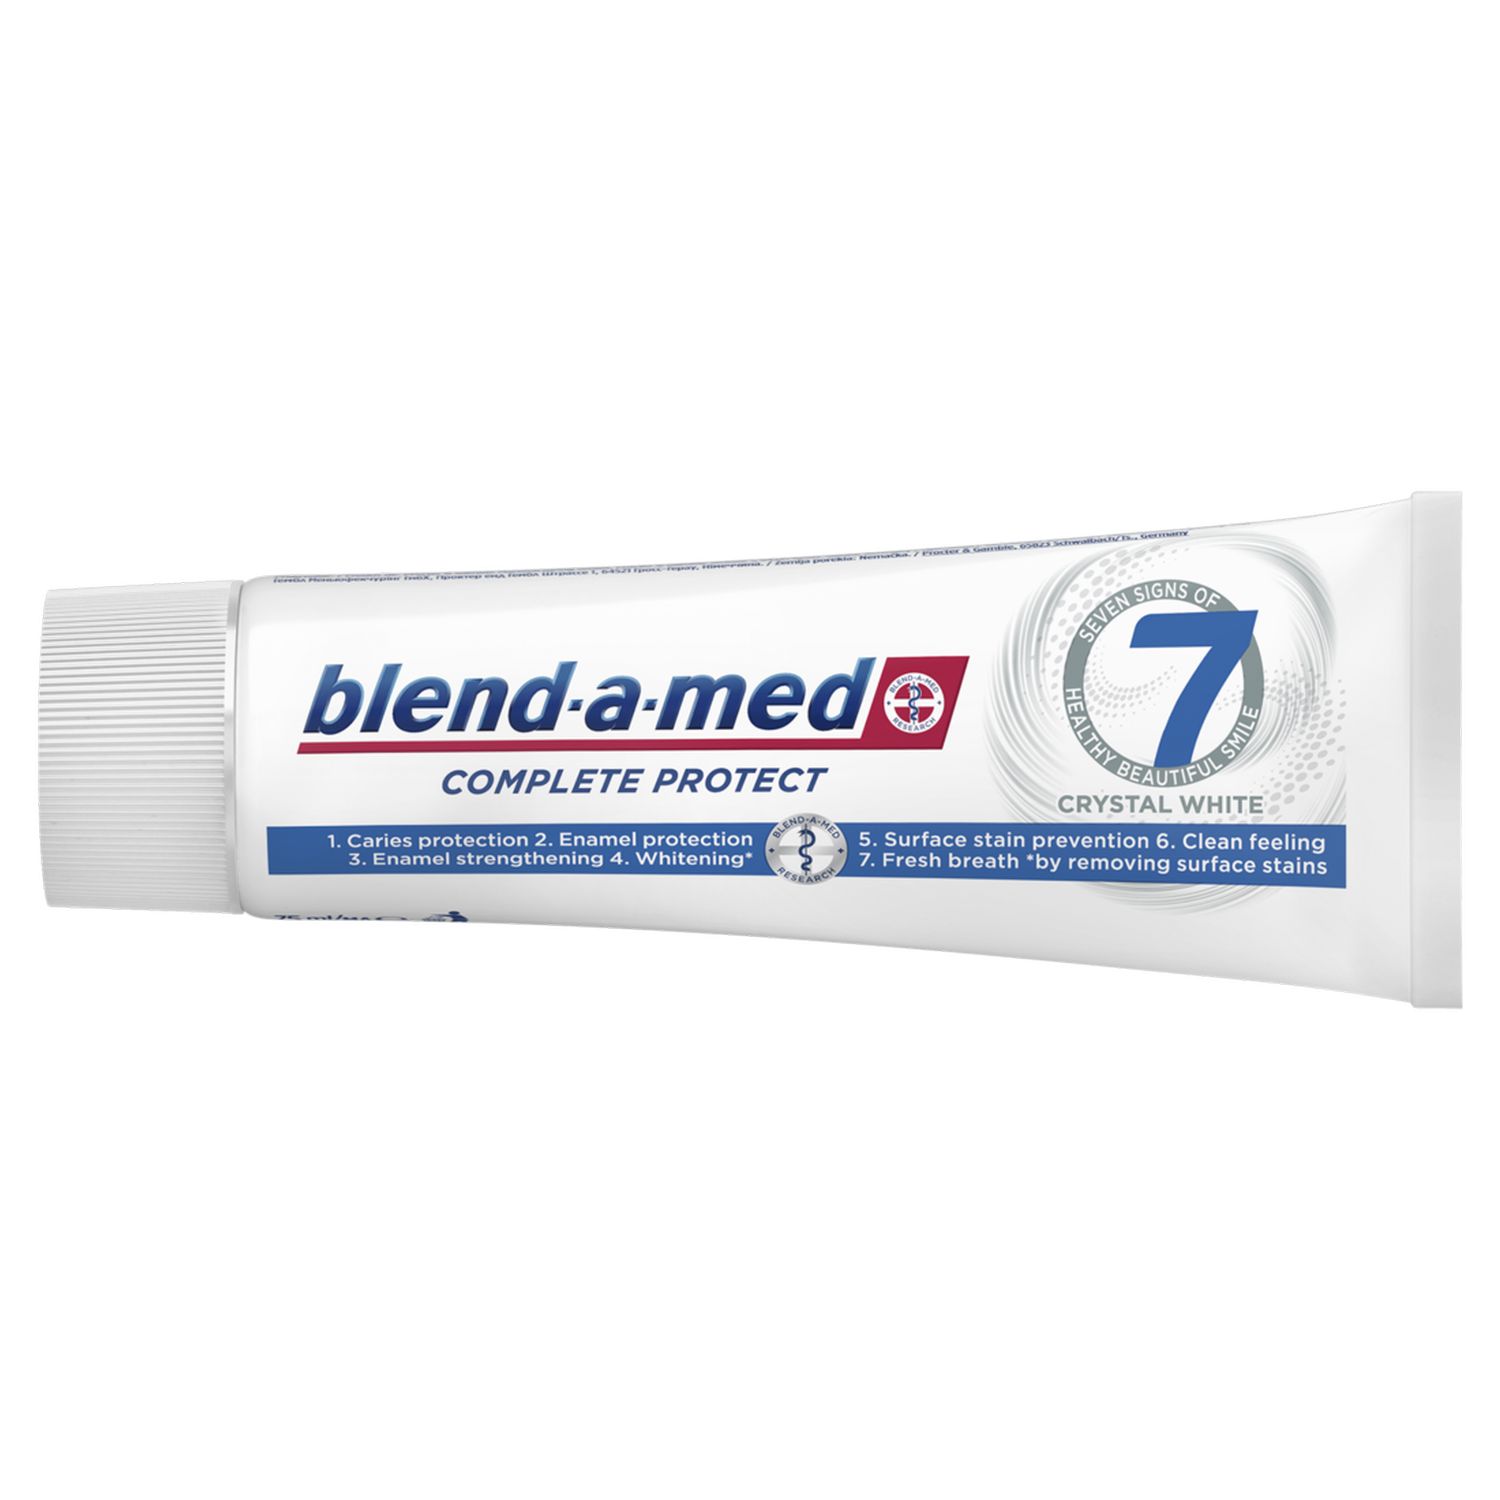 Зубна паста Blend-a-med Complete Protect 7 Кришталева білизна 75 мл - фото 2